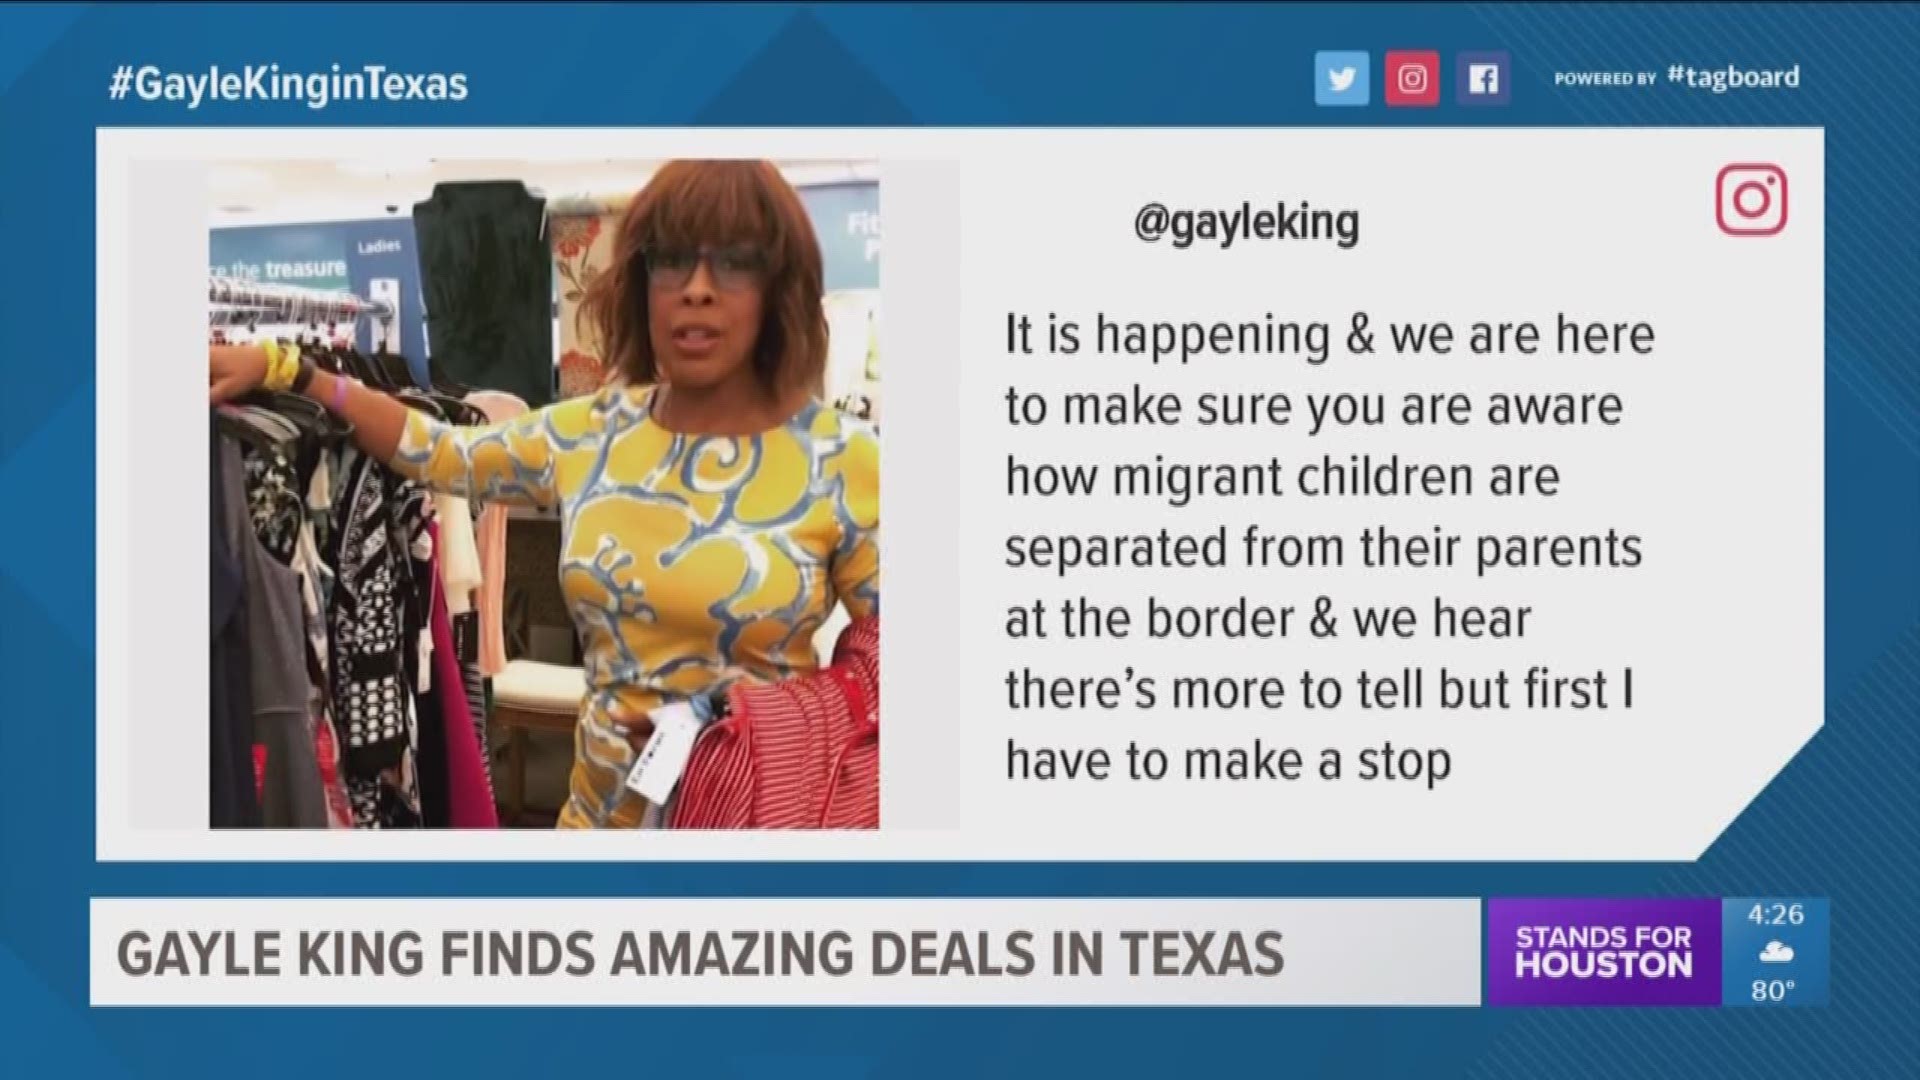 When CBS This Morning anchor Gayle King learned she'd be in McAllen covering the immigrant story longer than expected, she realized she didn't pack enough clothes. Her driver recommended Ross, a popular discount store,  and King scored five dresses for $74.